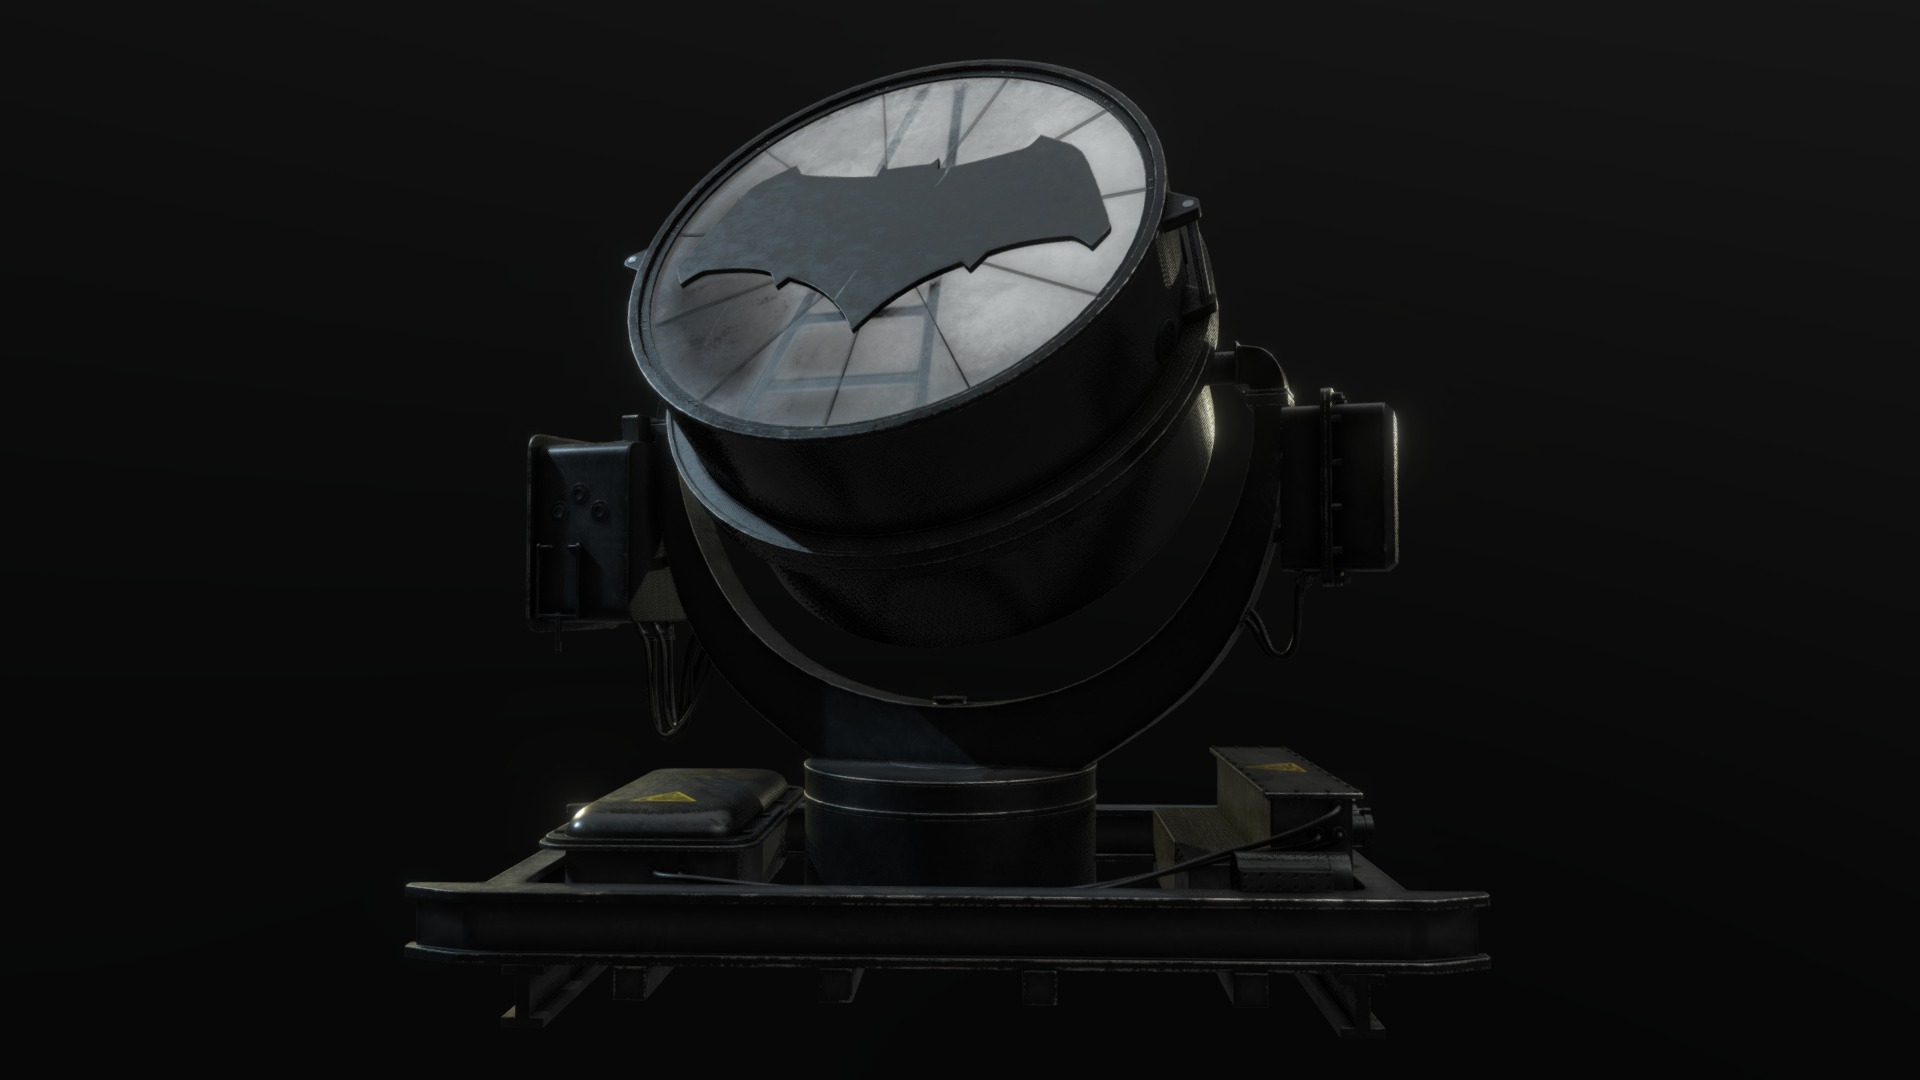 3D model Bat signal - This is a 3D model of the Bat signal. The 3D model is about a round black object with a round metal object on top.